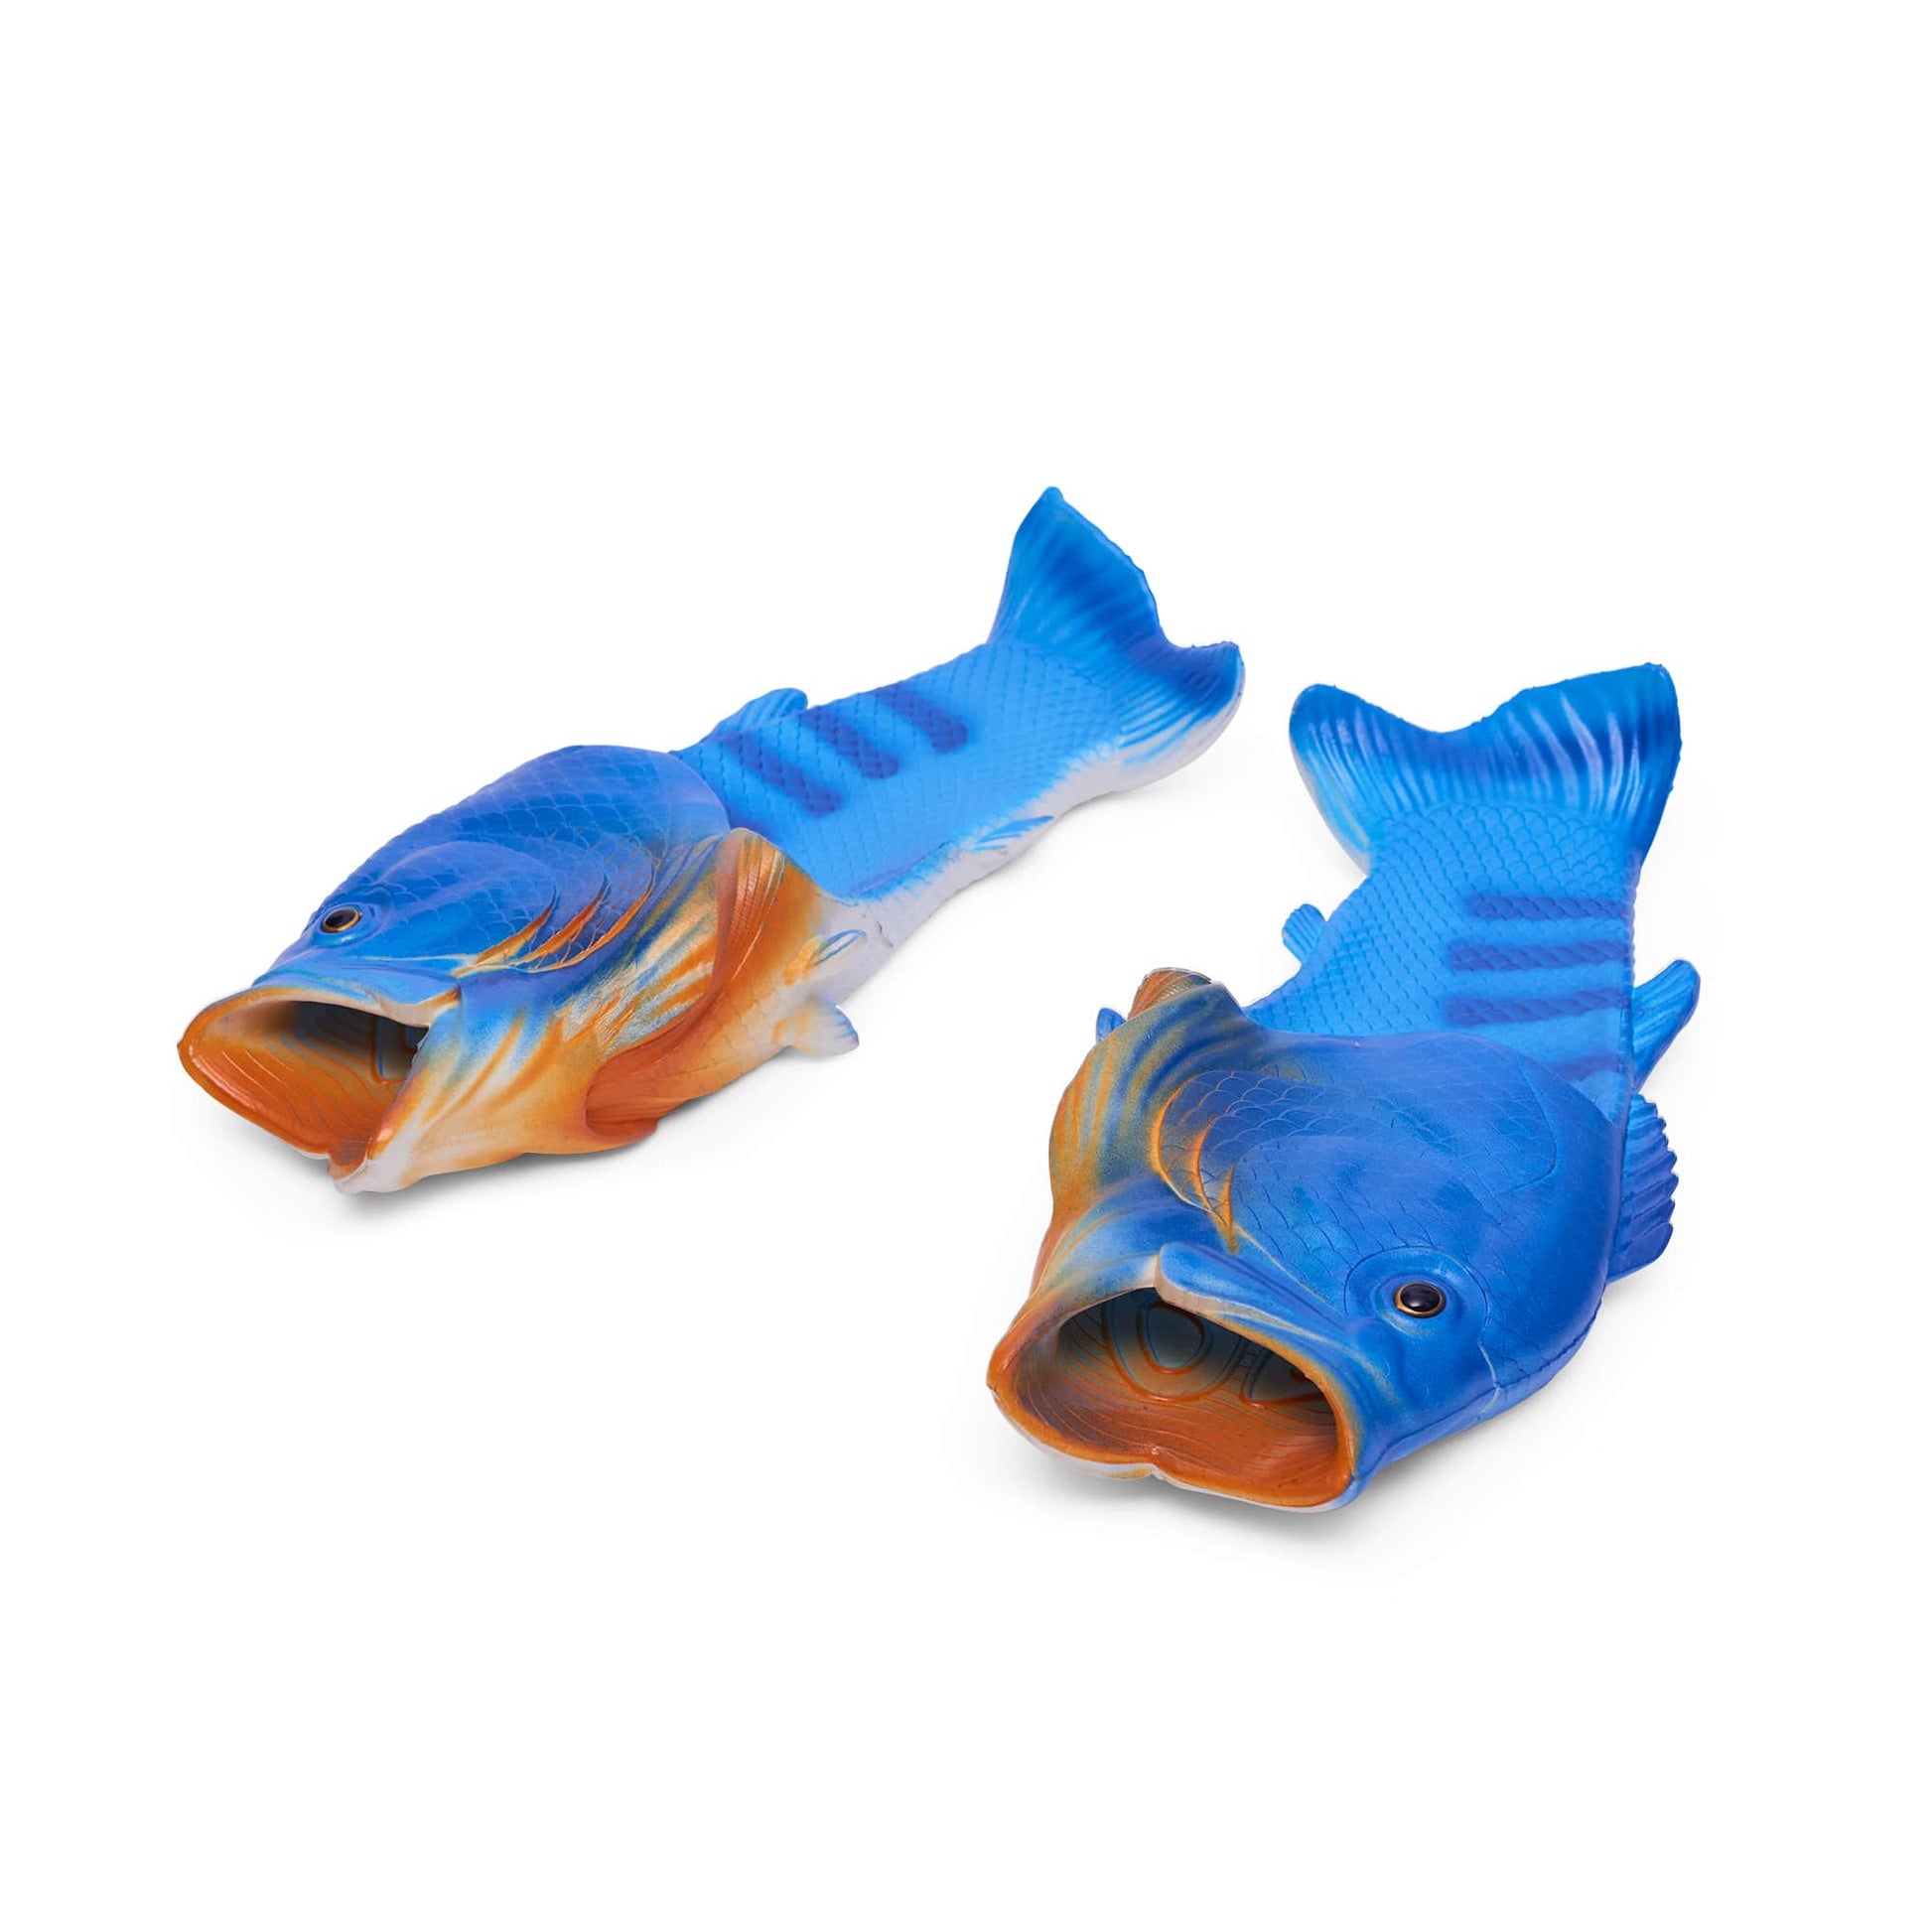 Electric blue and orange/brown  fish slippers --- slide slippers in the shape and texture of a fish, mouth of fish is the opening for the toes